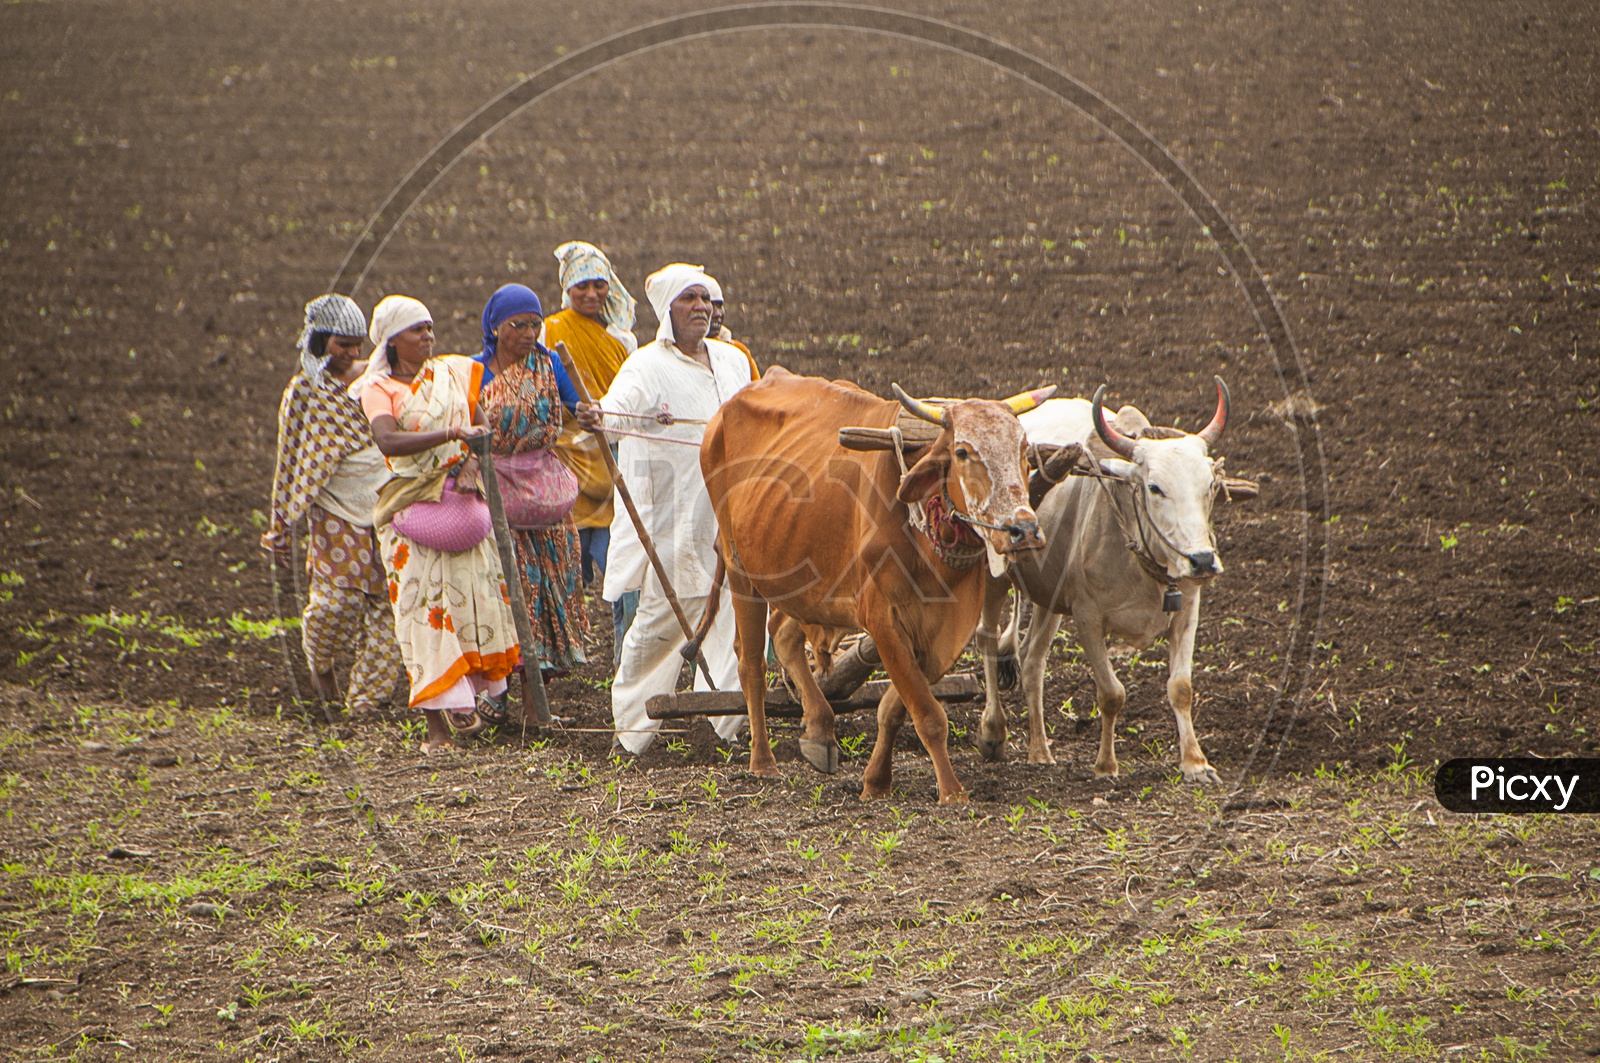 Farmers and workers are plowing in agricultural field